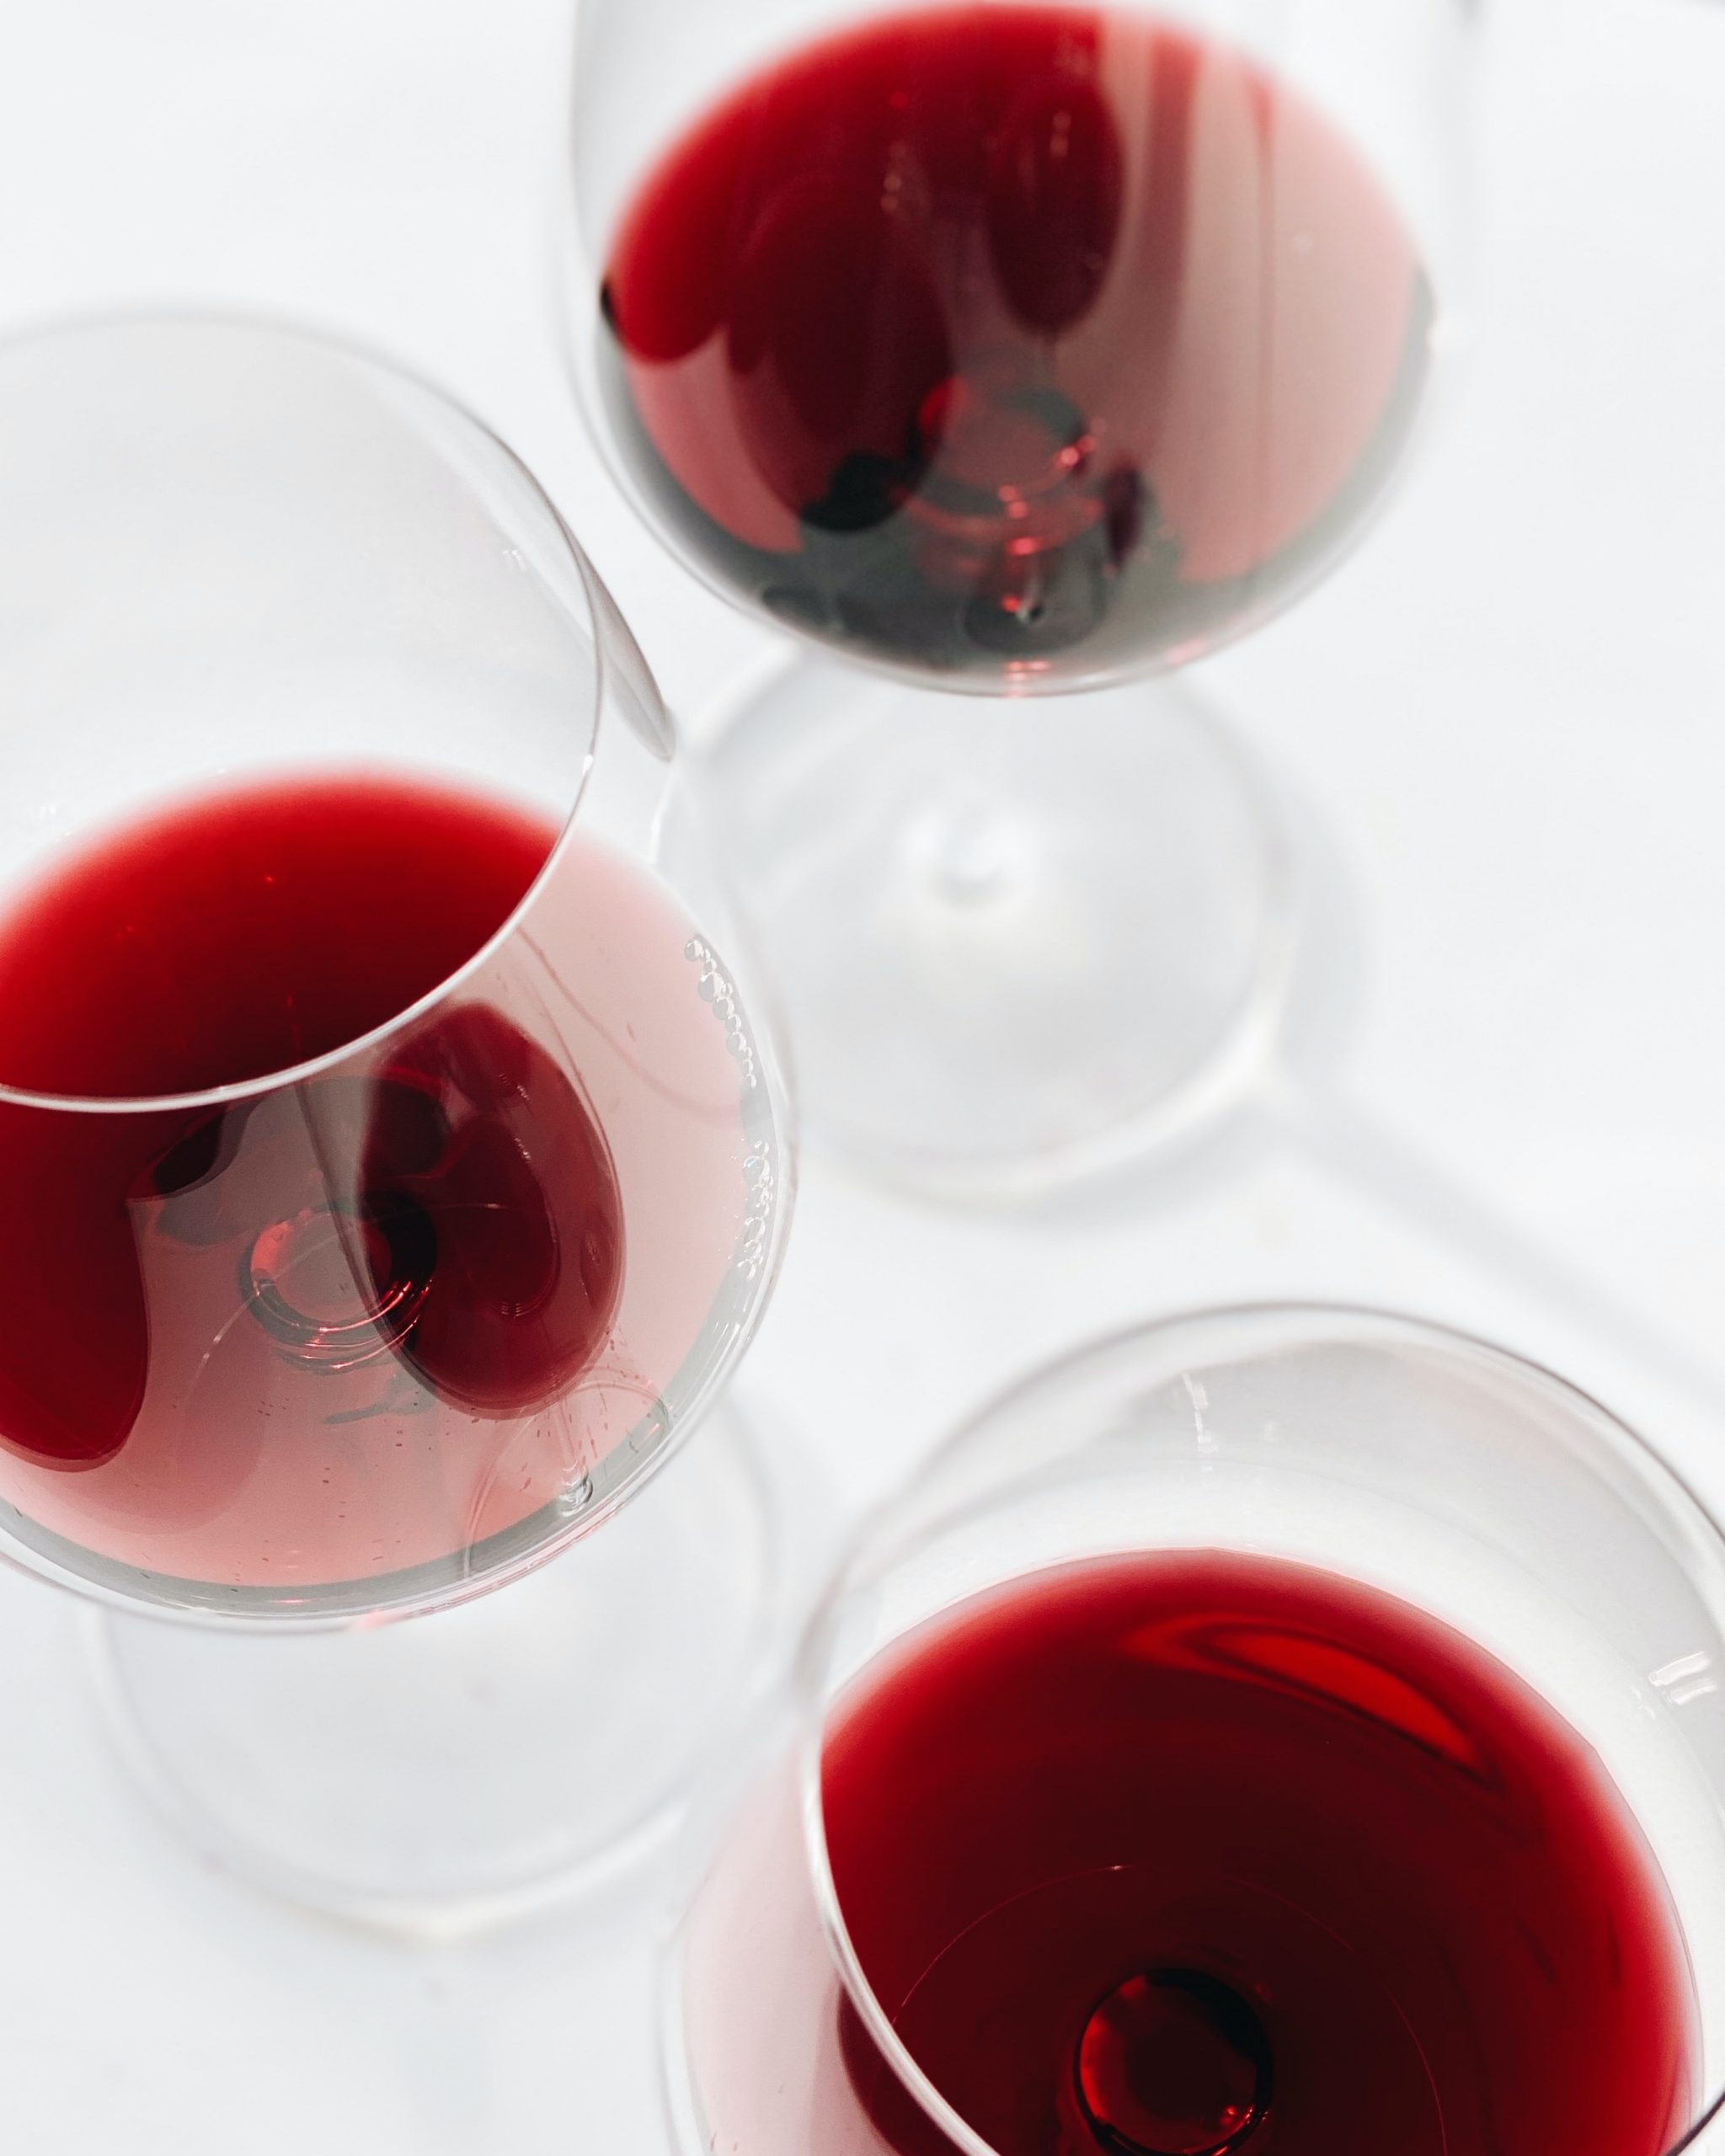 August 28th is National Red Wine Day